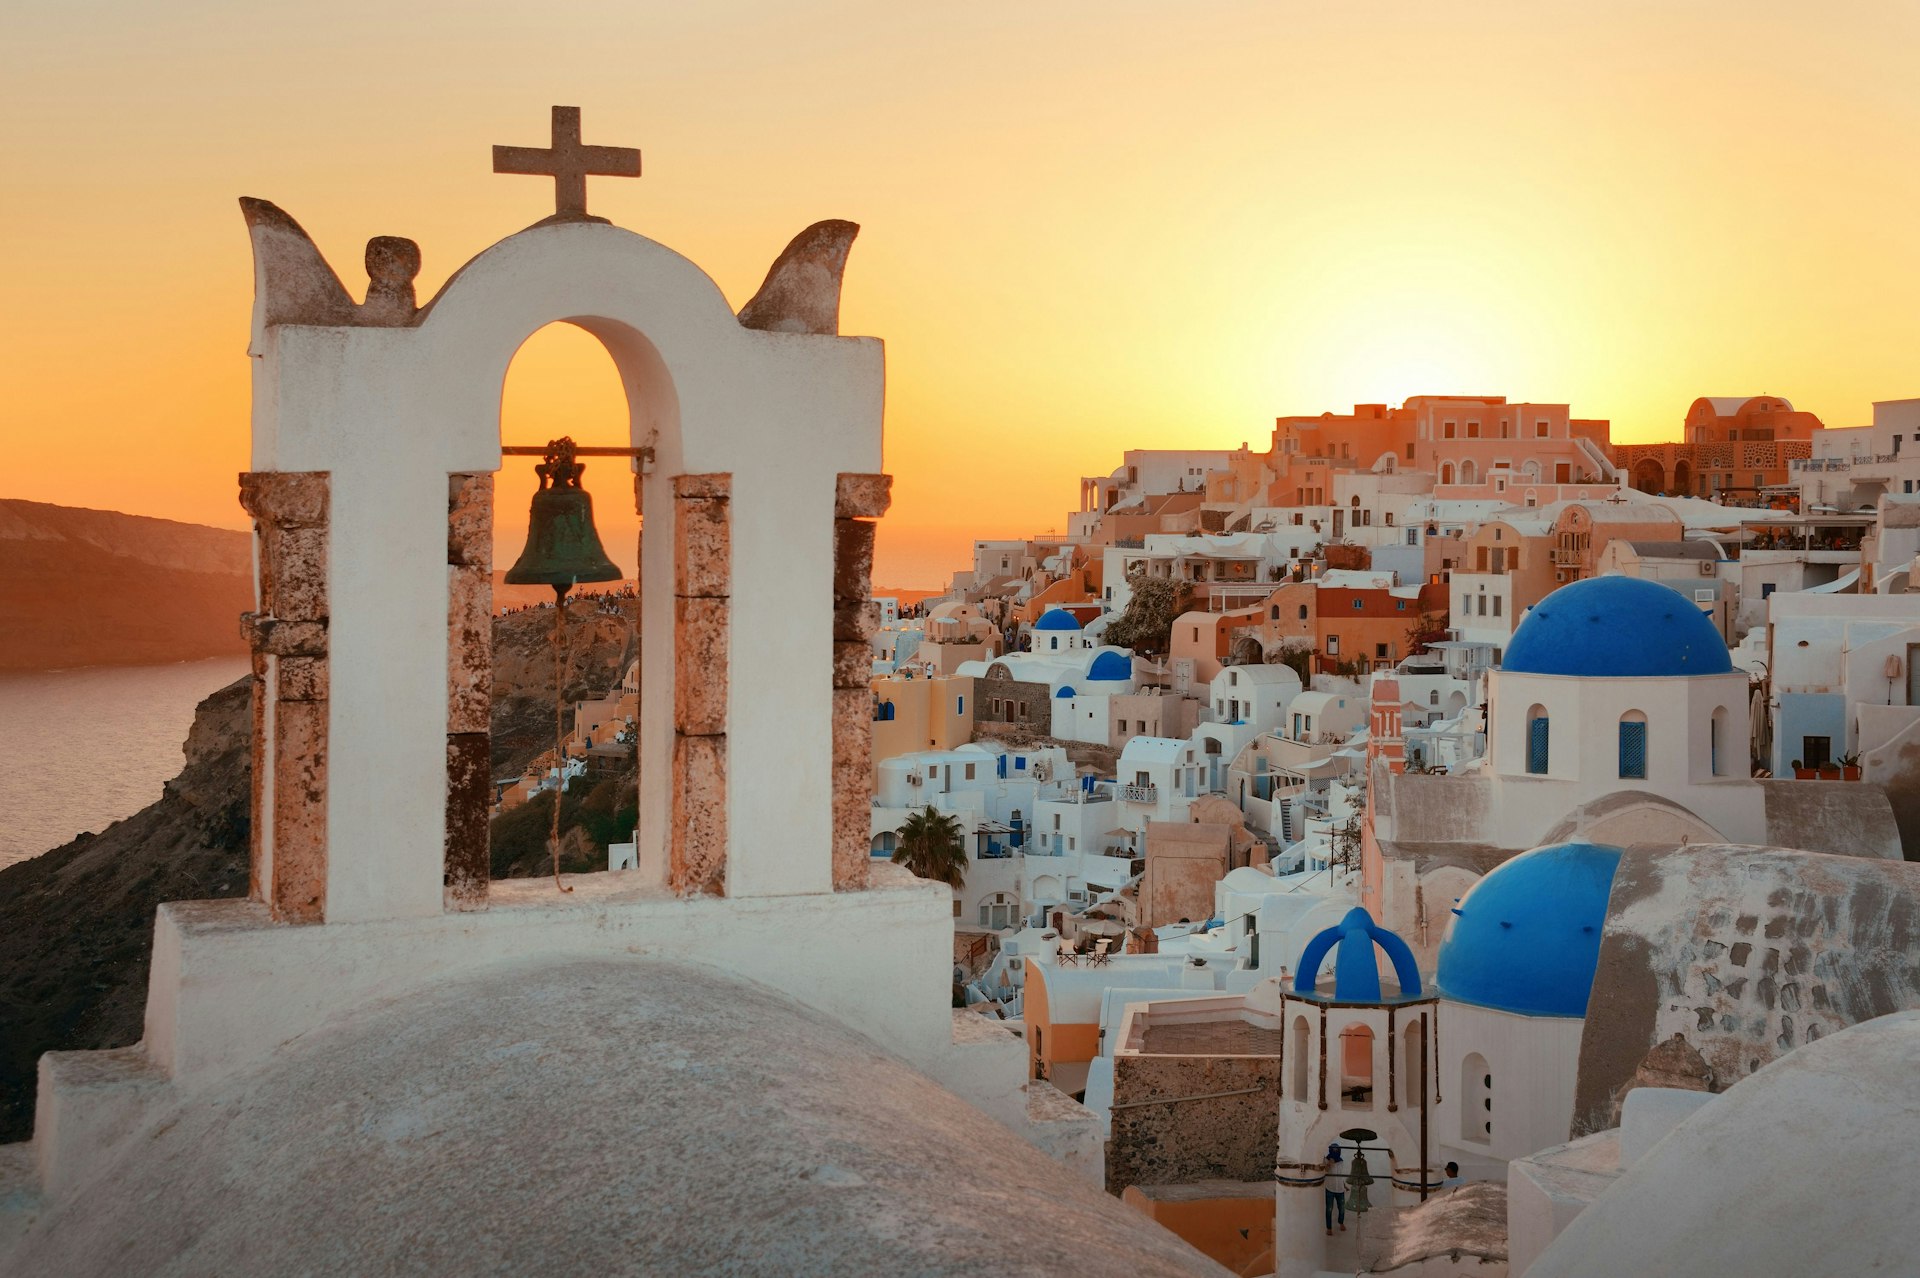 Oia skyline during sunset with church bell